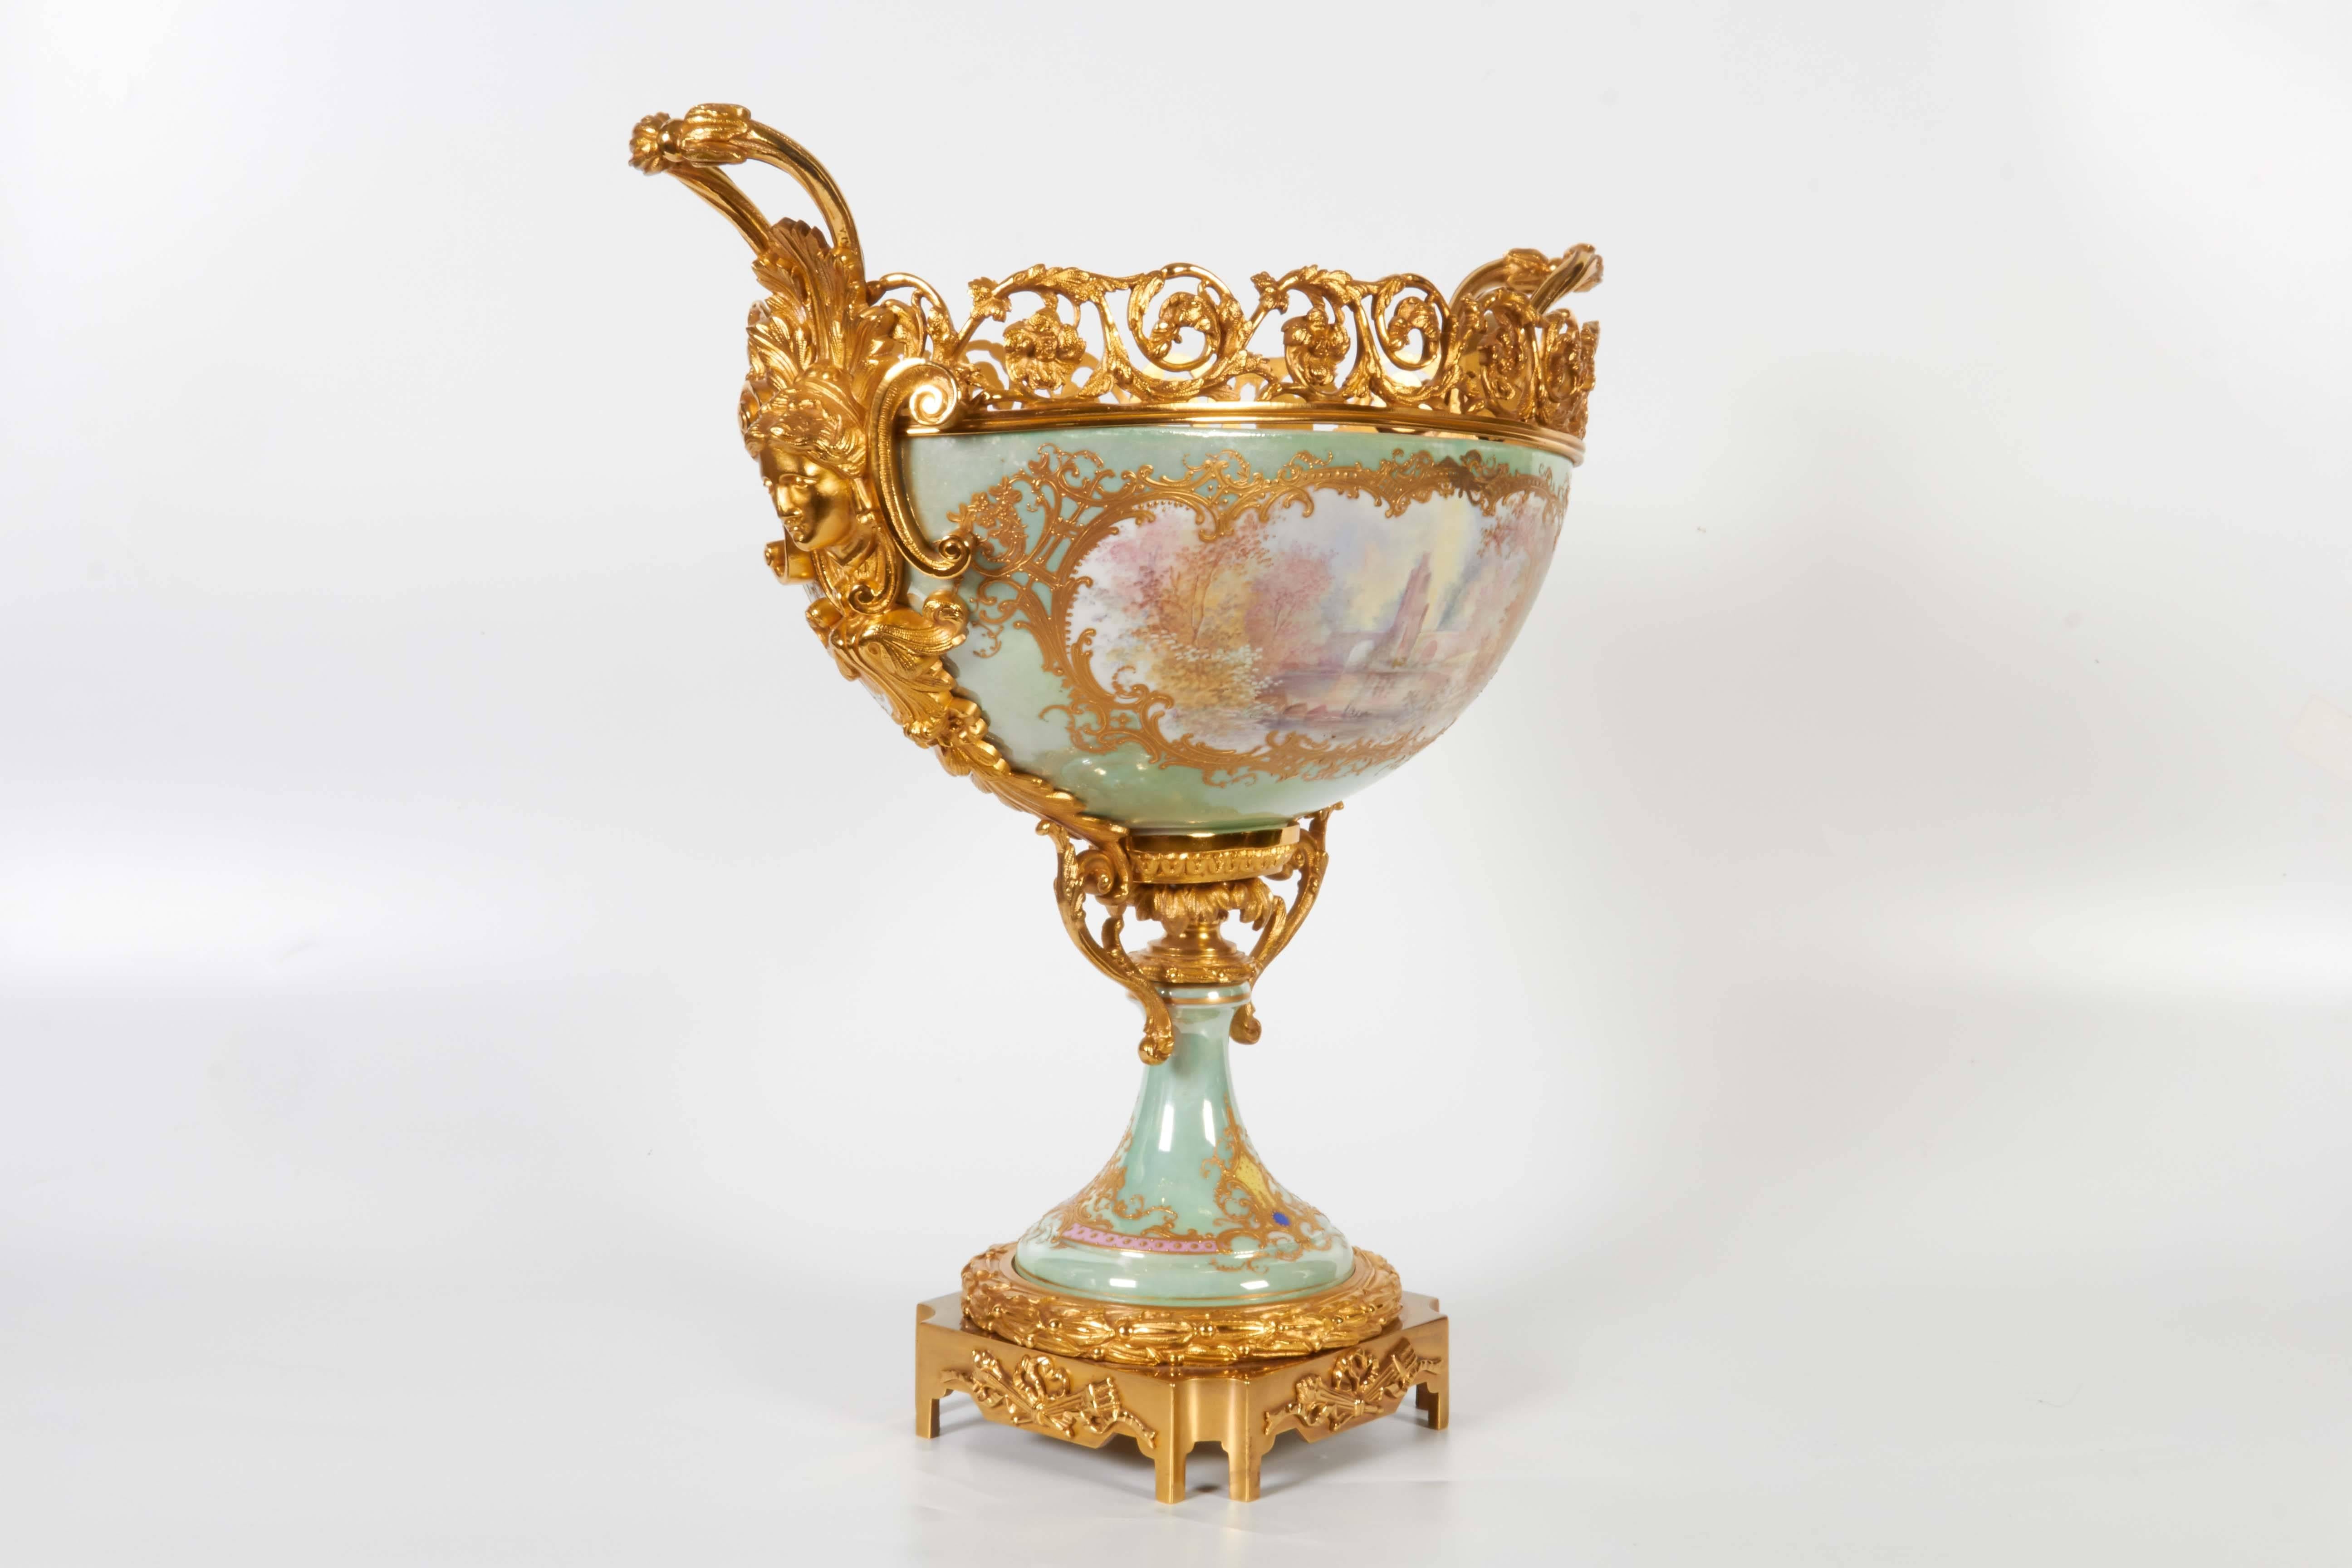 Late 19th Century French Sèvres Porcelain & Ormolu-Mounted Hand-Painted Oval Centerpiece/Jardenier For Sale